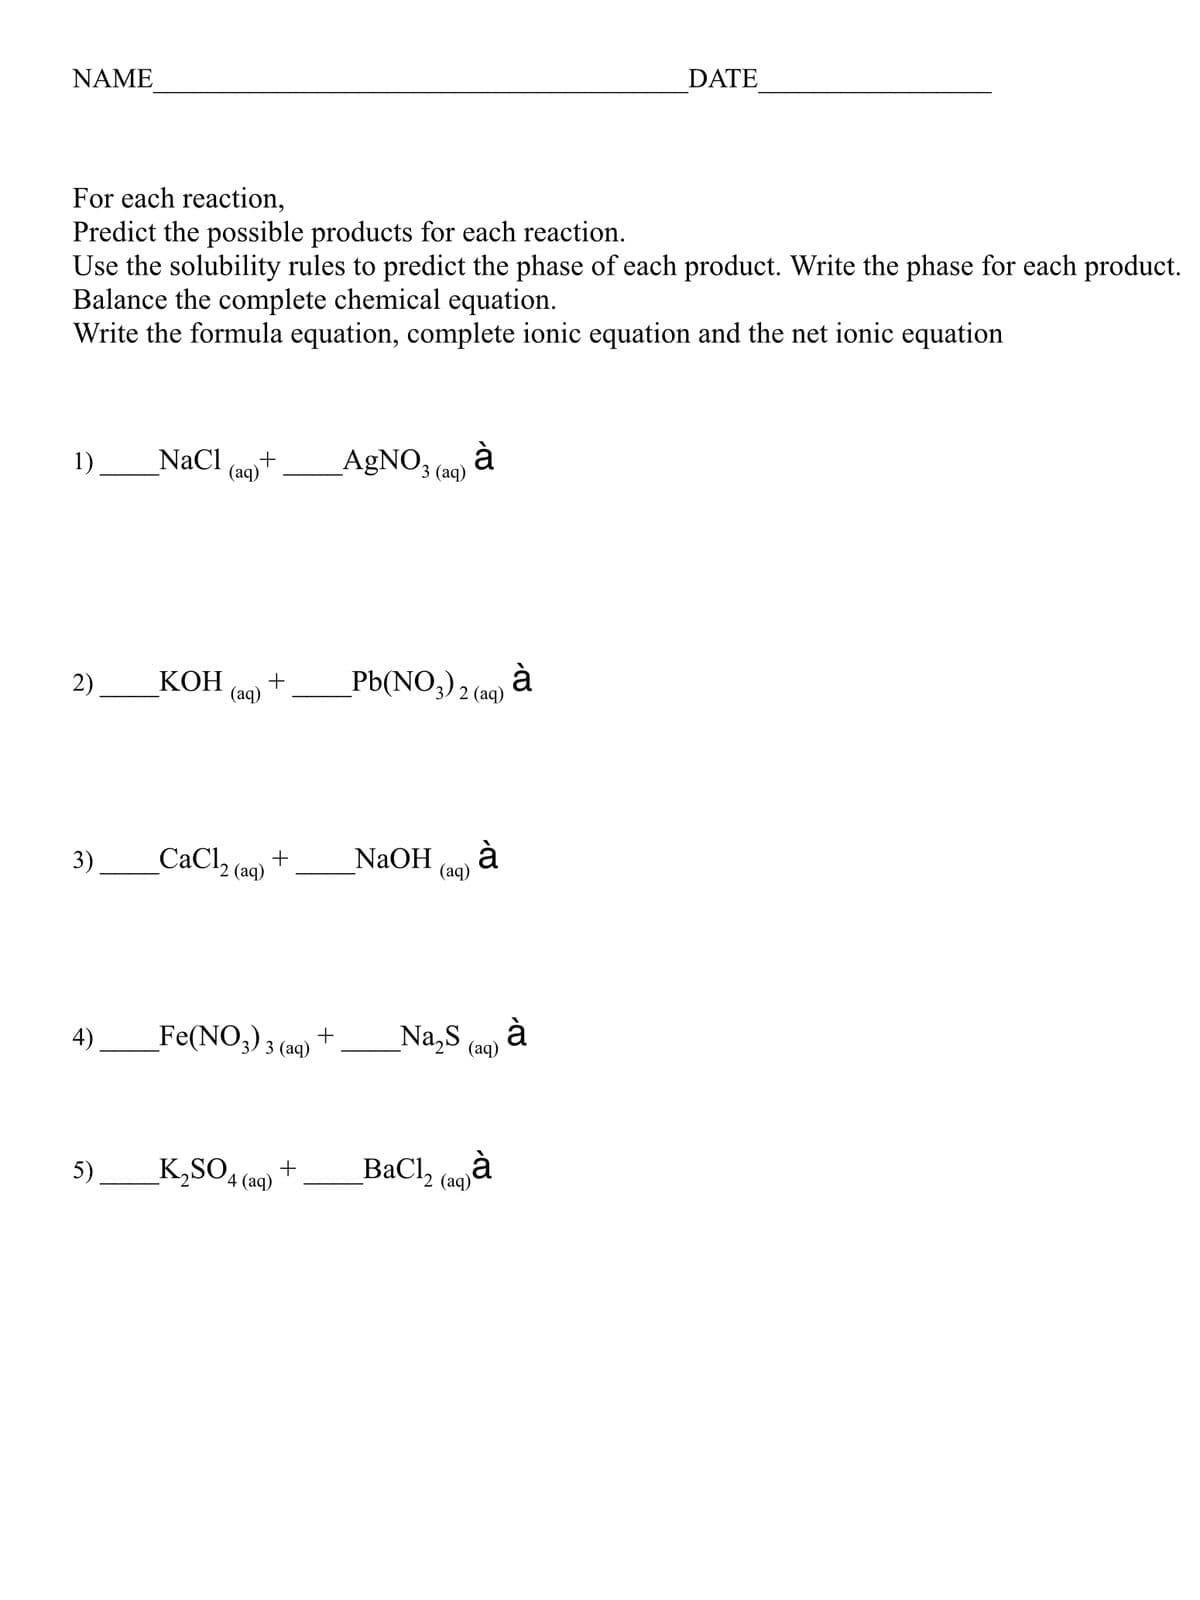 NAME
DATE
For each reaction,
Predict the possible products for each reaction.
Use the solubility rules to predict the phase of each product. Write the phase for each product.
Balance the complete chemical equation.
Write the formula equation, complete ionic equation and the net ionic equation
1)
NaCl
(aq)
AgNO3 (0) à
2)
КОН
_Pb(NO,),
à
2 (aq)
+
(aq)
3)
_CaCl (aq) +
à
NaOH
(аq)
Fe(NO3) 3 (aq)
Na,S
à
(aq)
4)
+
K,SO4 (aq)
_BaCl, (Goà
5).
(аq)
